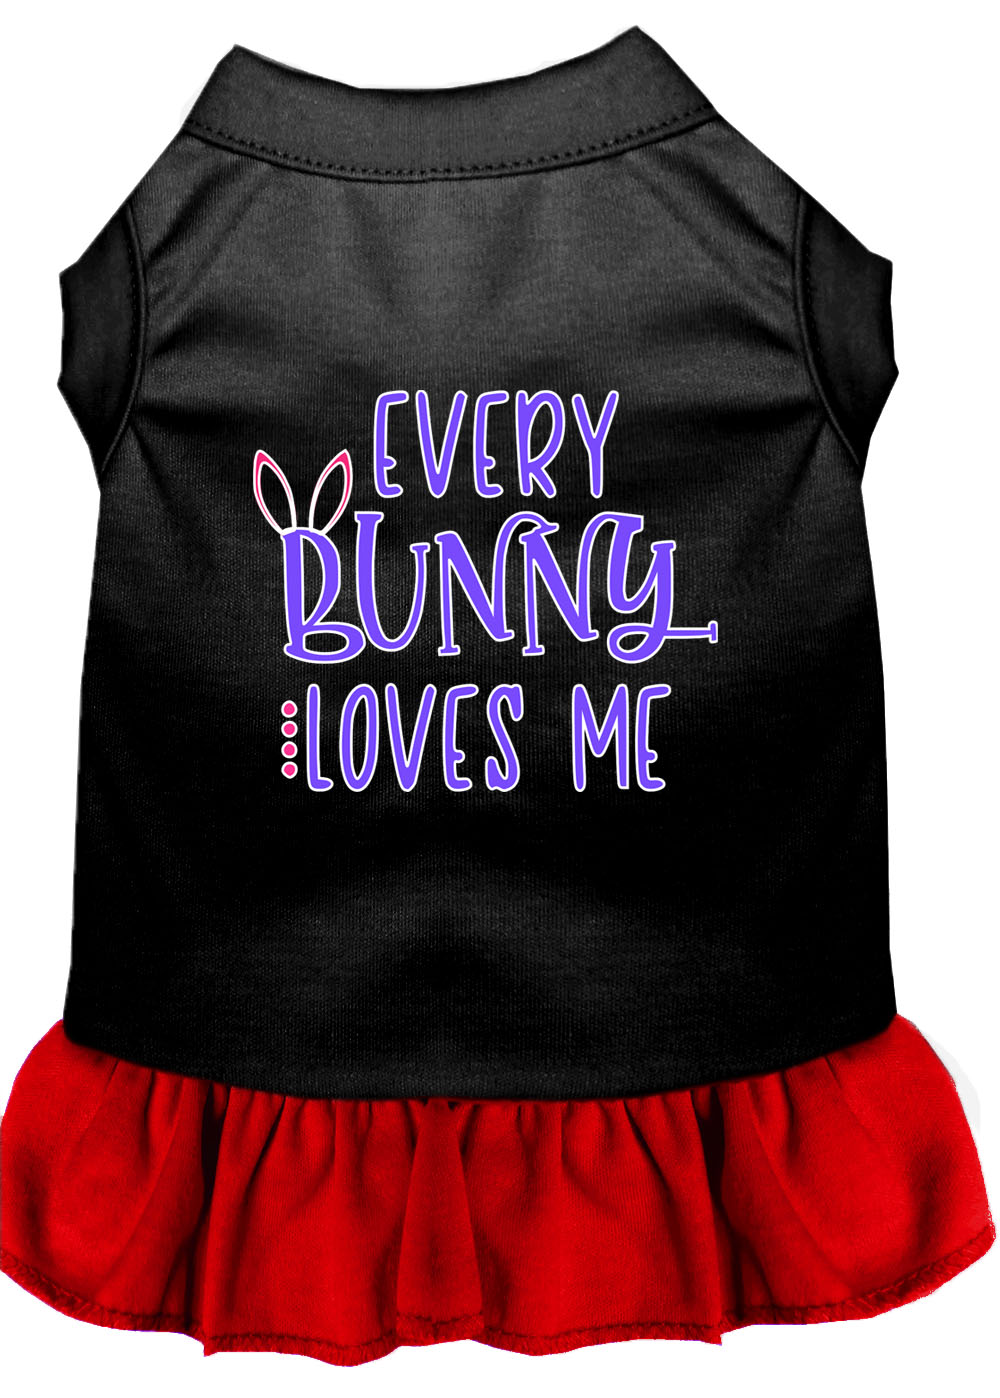 Every Bunny Loves me Screen Print Dog Dress Black with Red Lg